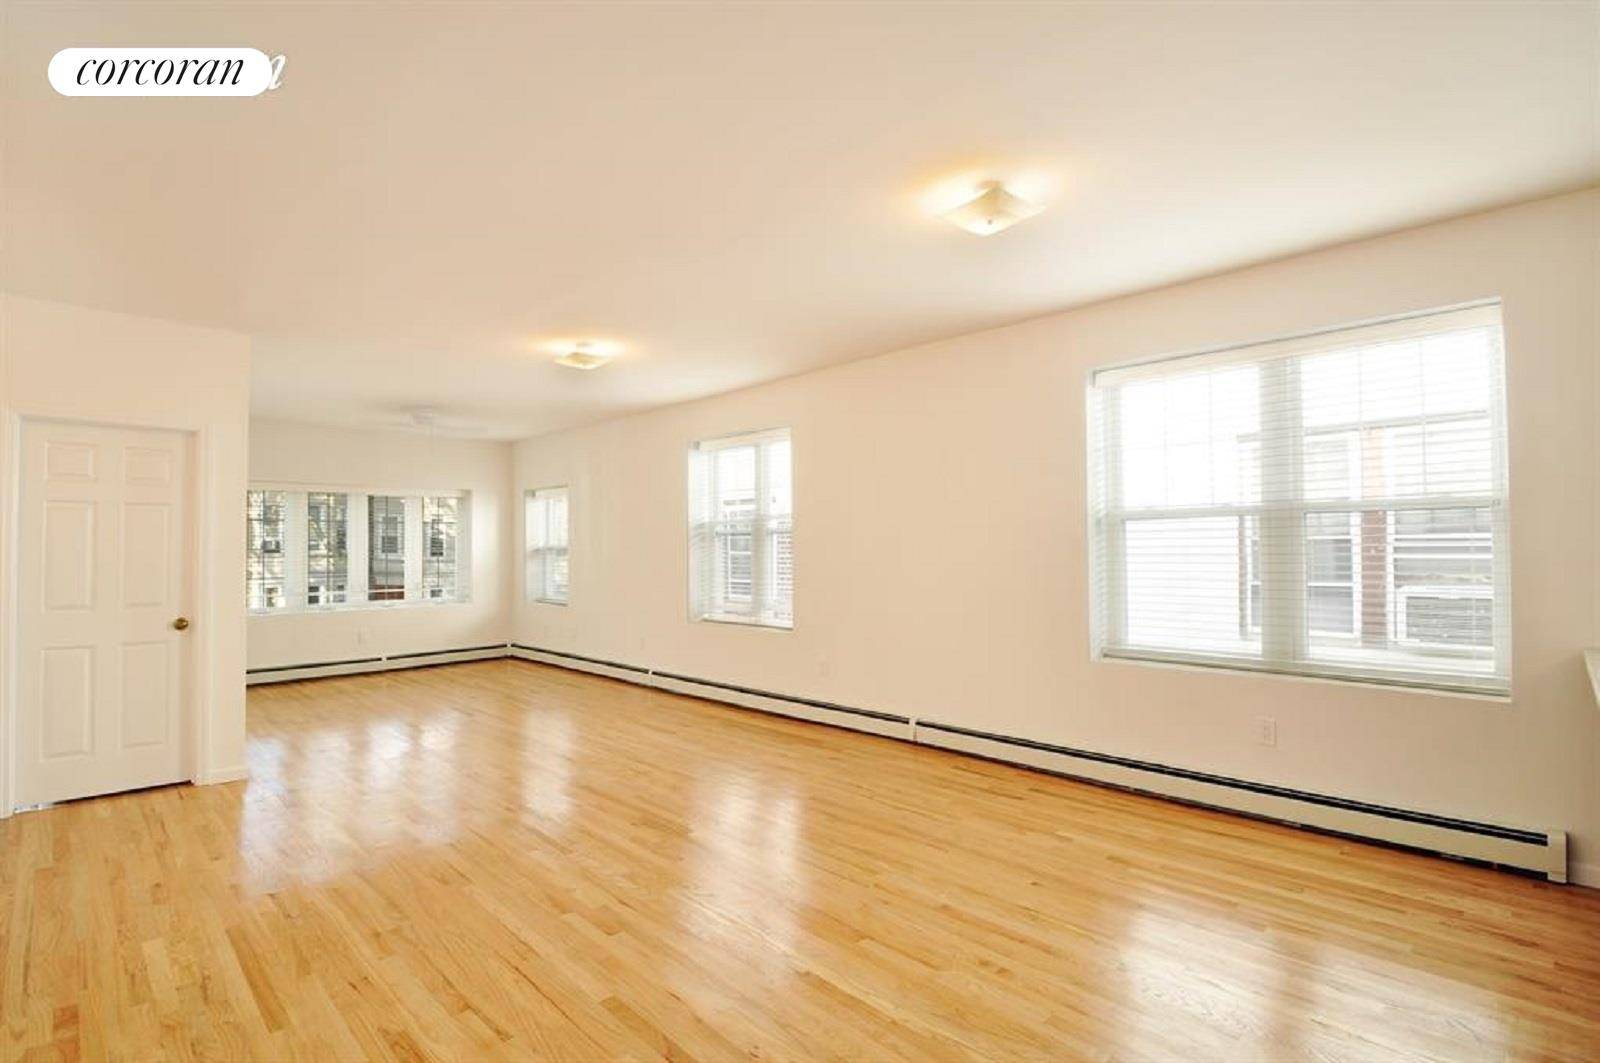 Welcome to 36 Sterling street apt 2 in Prospect Lefferts Gardens !